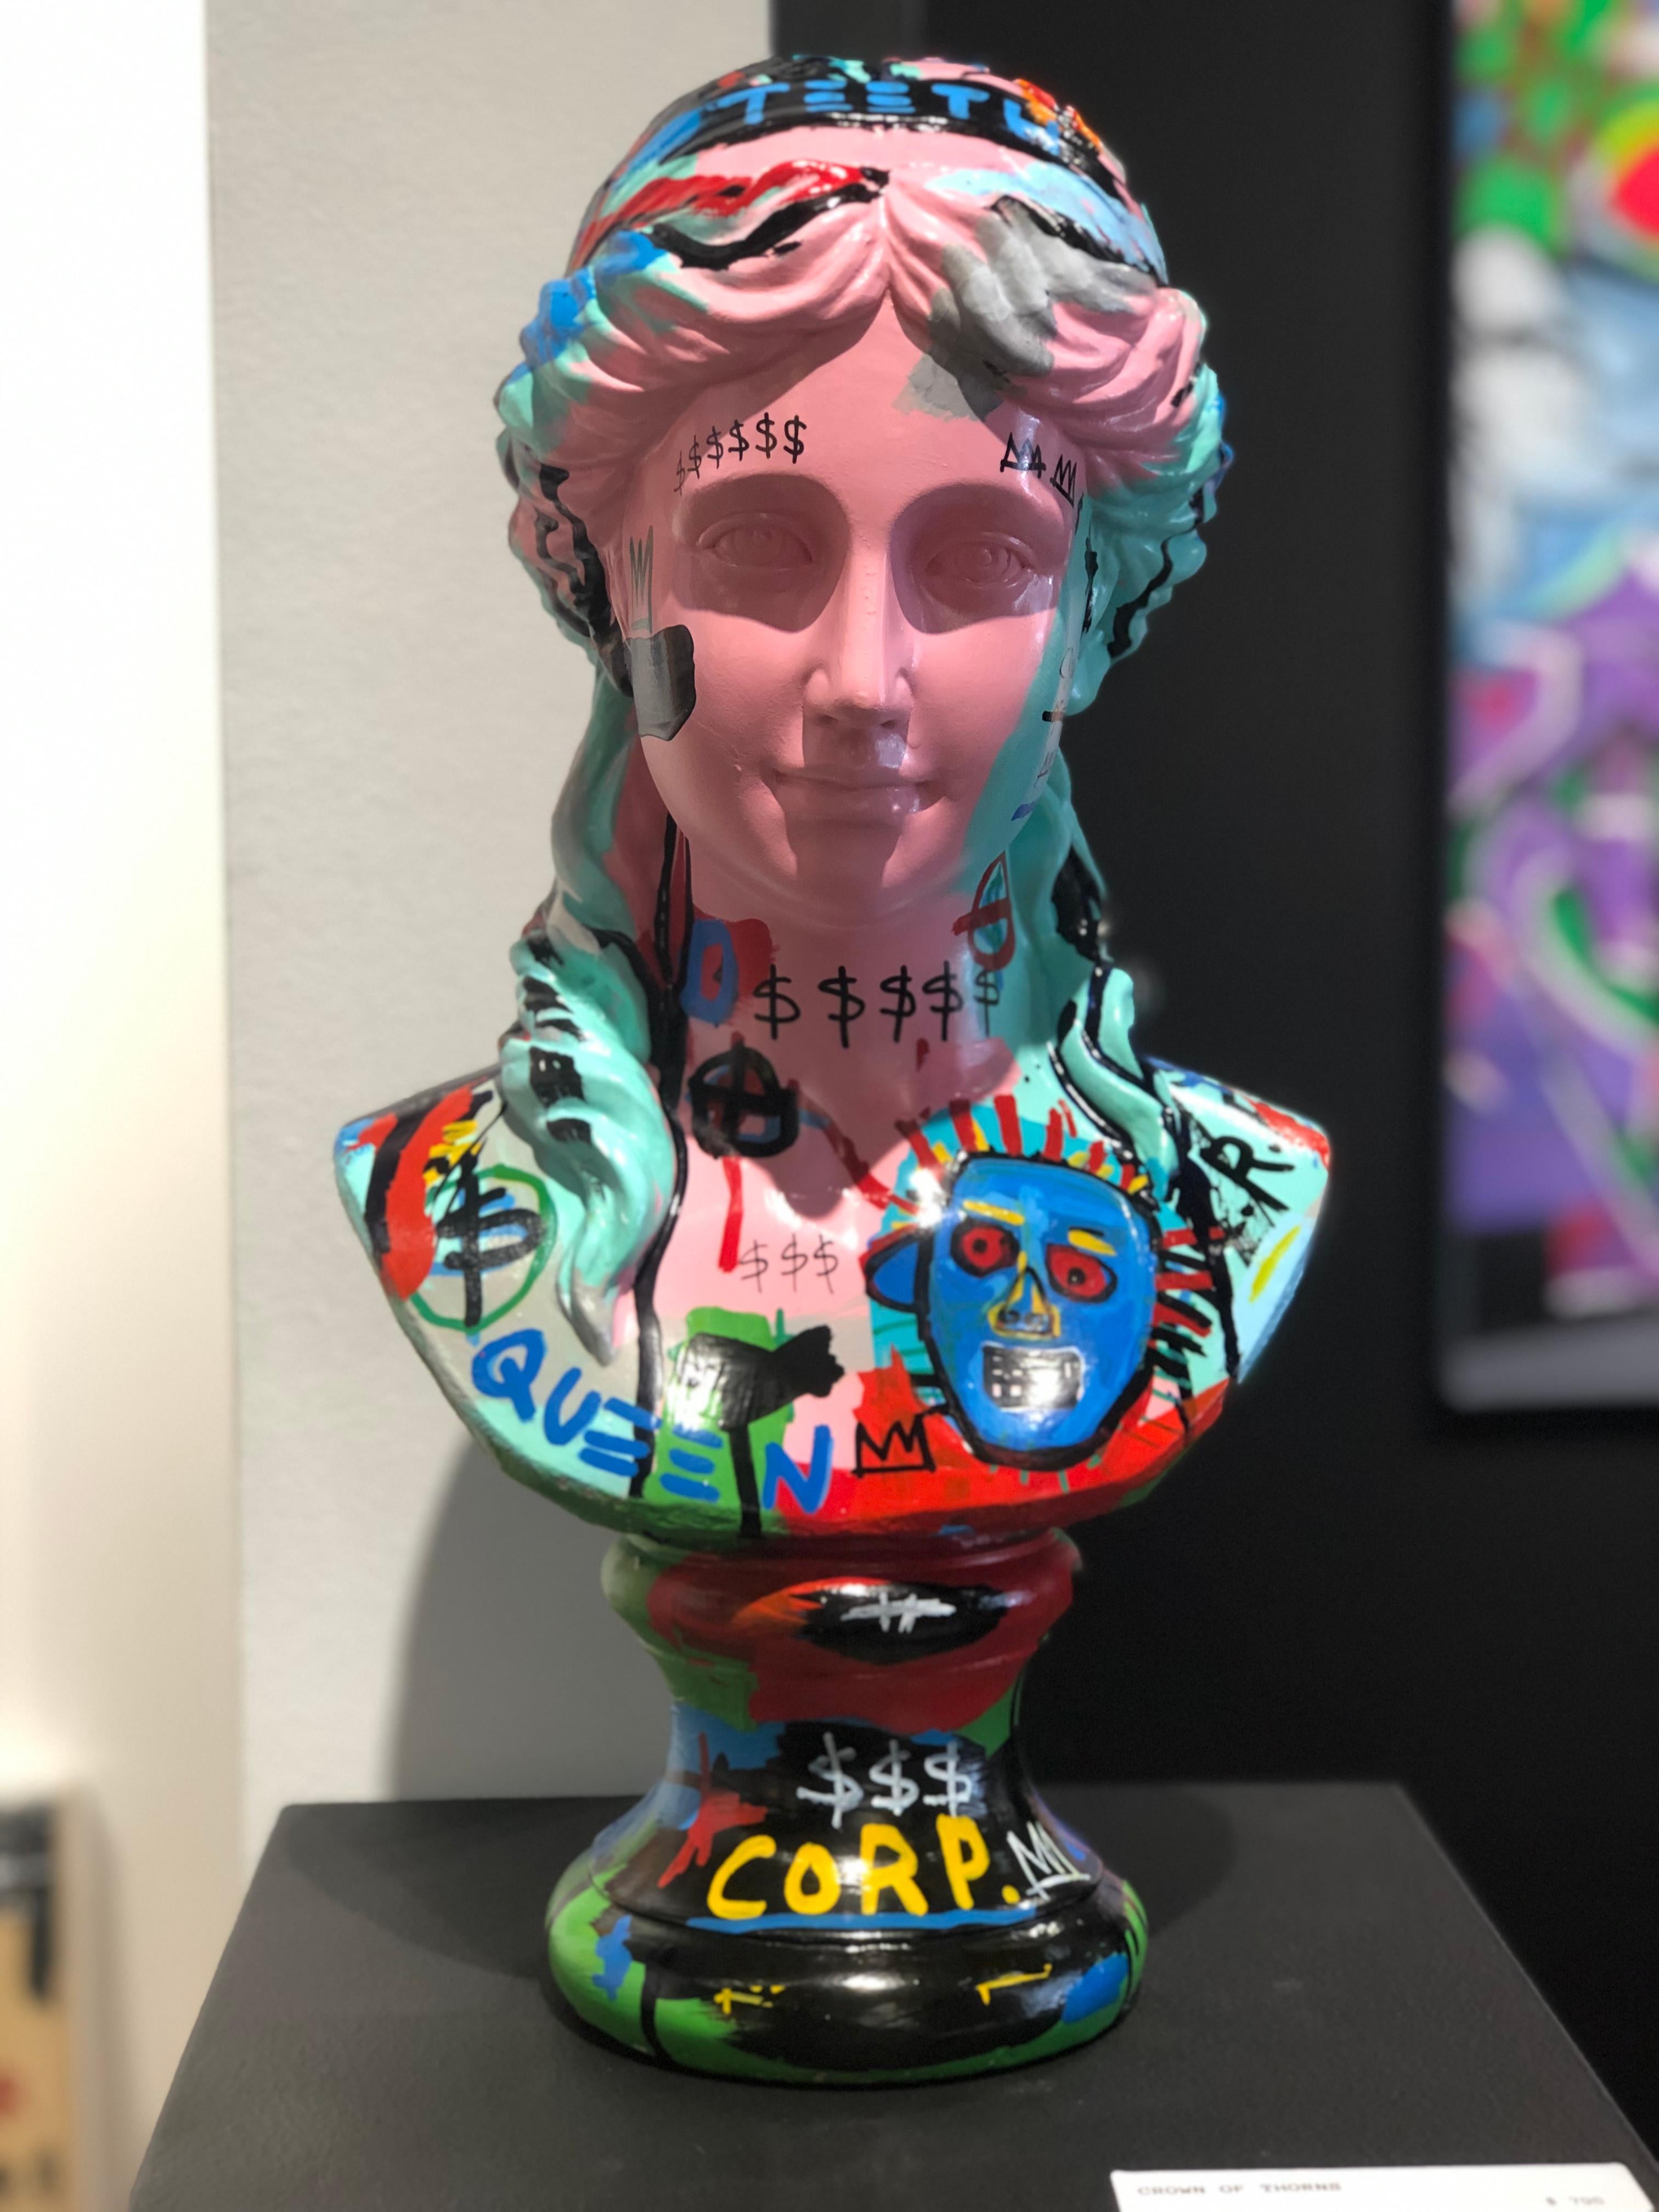 A. Gomez
Crown of Thorns
17" x 8.5" x 5"
Acrylic Paint on Sculpture
2019

Original

A. Gomez is a self-taught artist based out of Miami & Central Florida.
Anthony Gomez displayed his work during Art Basel 2016 in the Wynwood Art District of Miami,